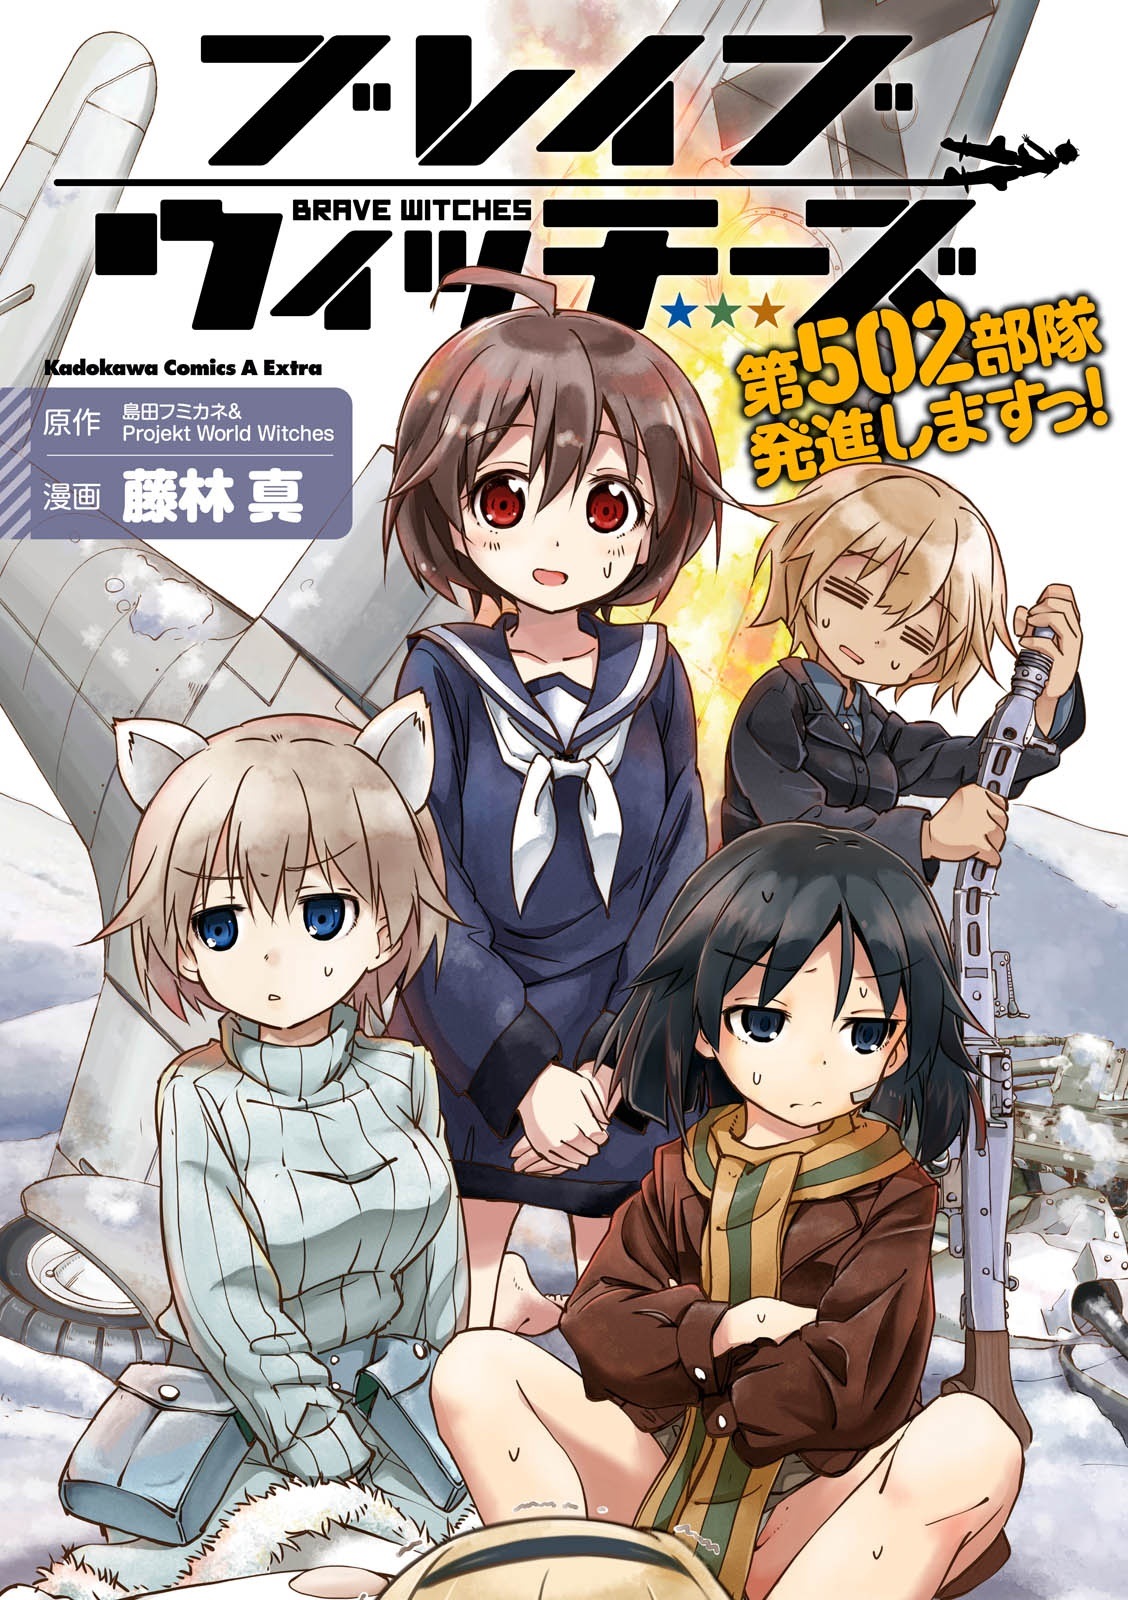 Strike Witches / Brave Witches / Luminous Witches - AN Shows - AN Forums